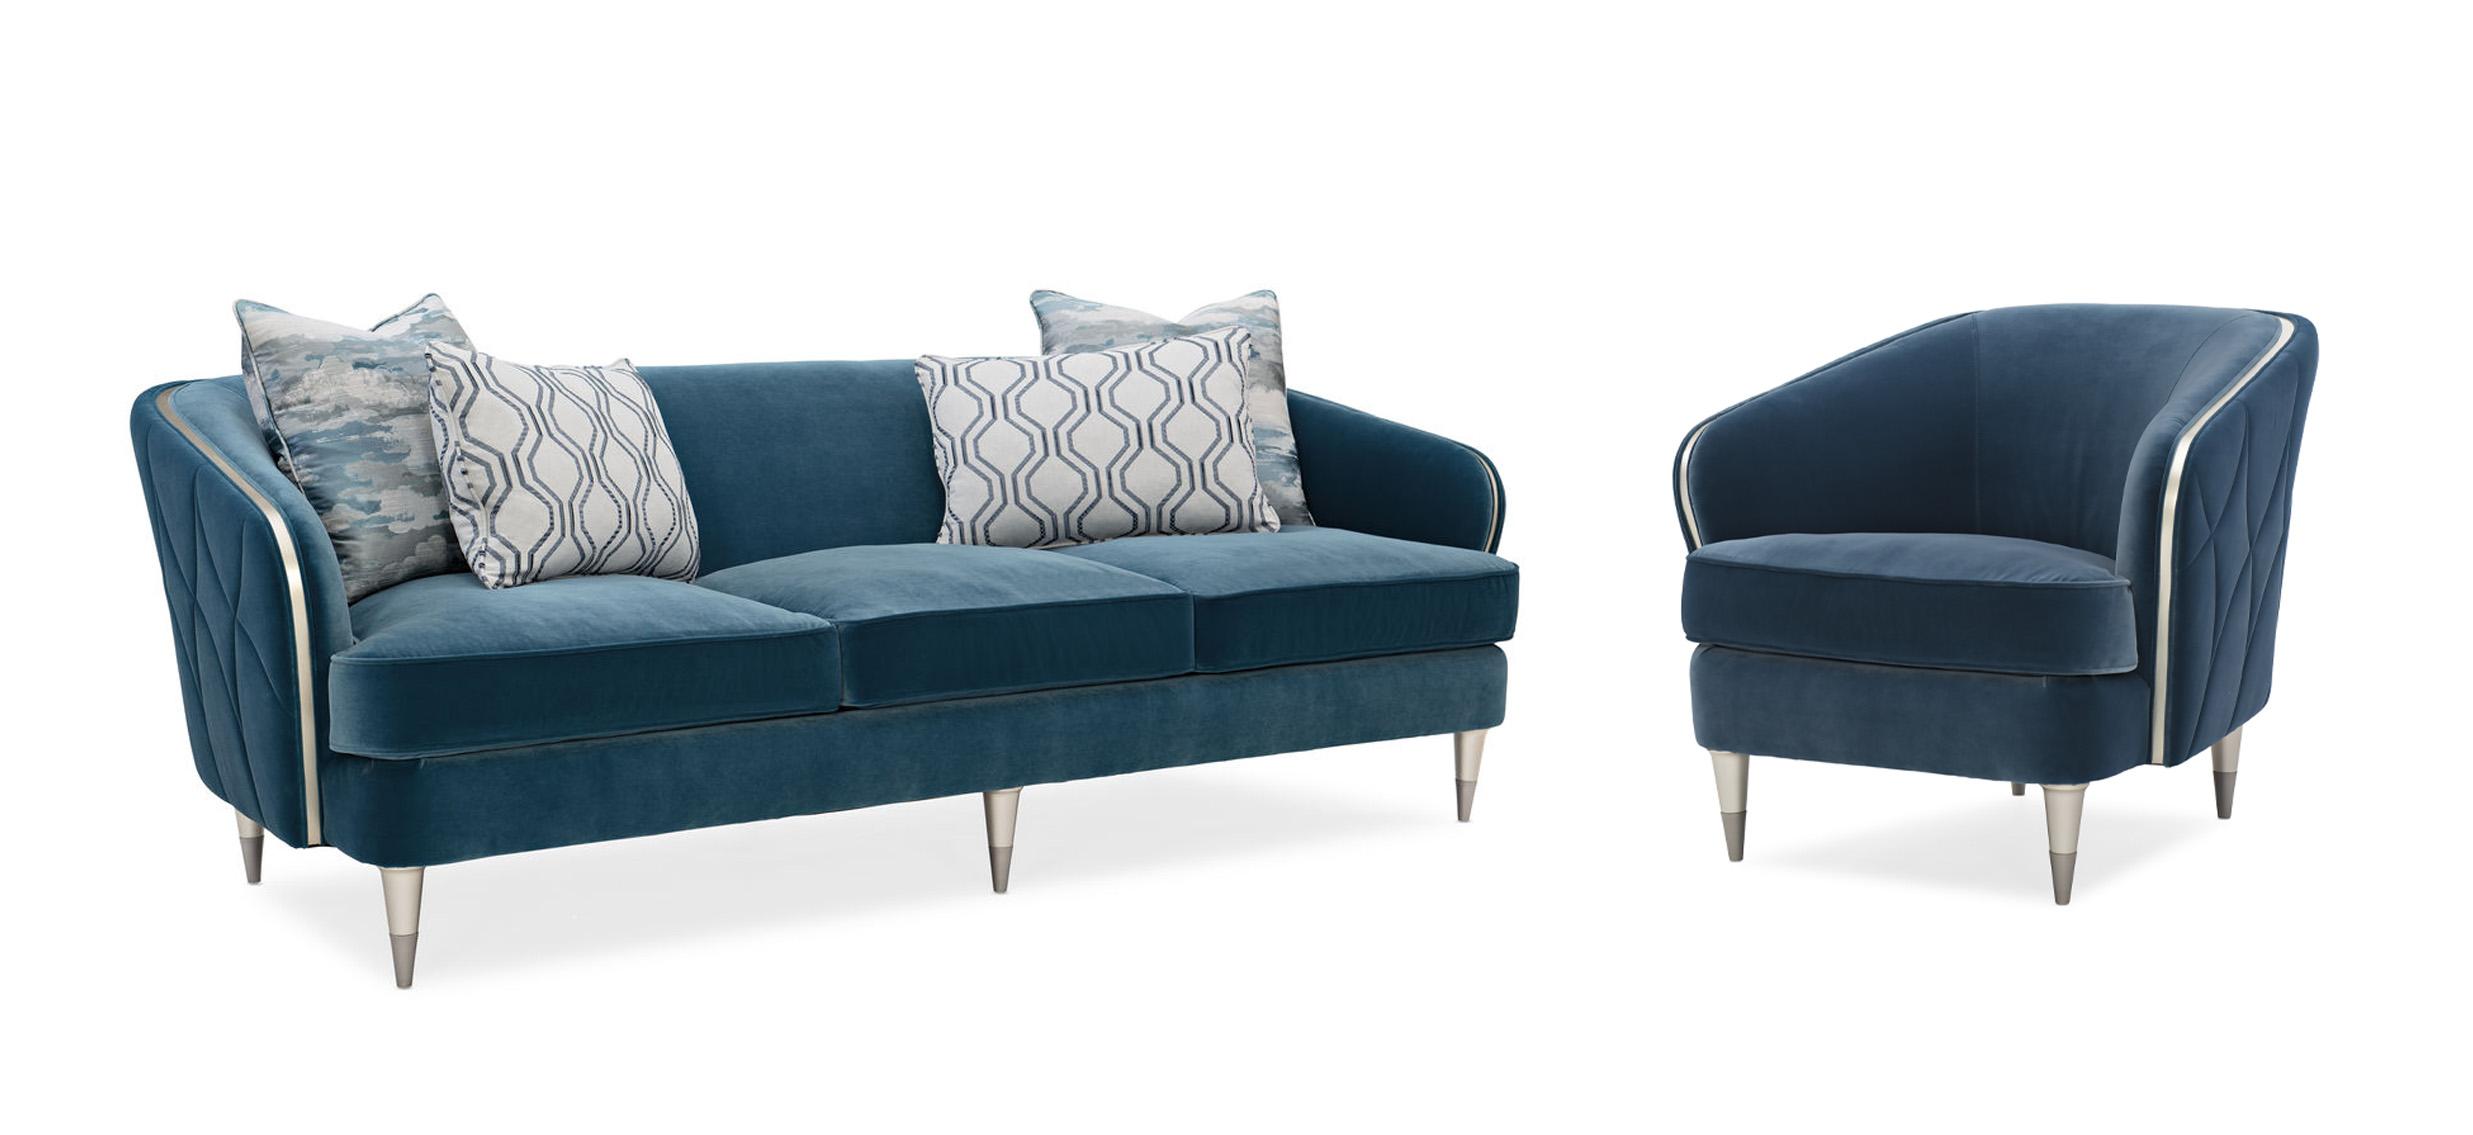 Contemporary Sofa and Chair Hour Time UPH-419-011-A-Set-2 in Prussian blue Velvet